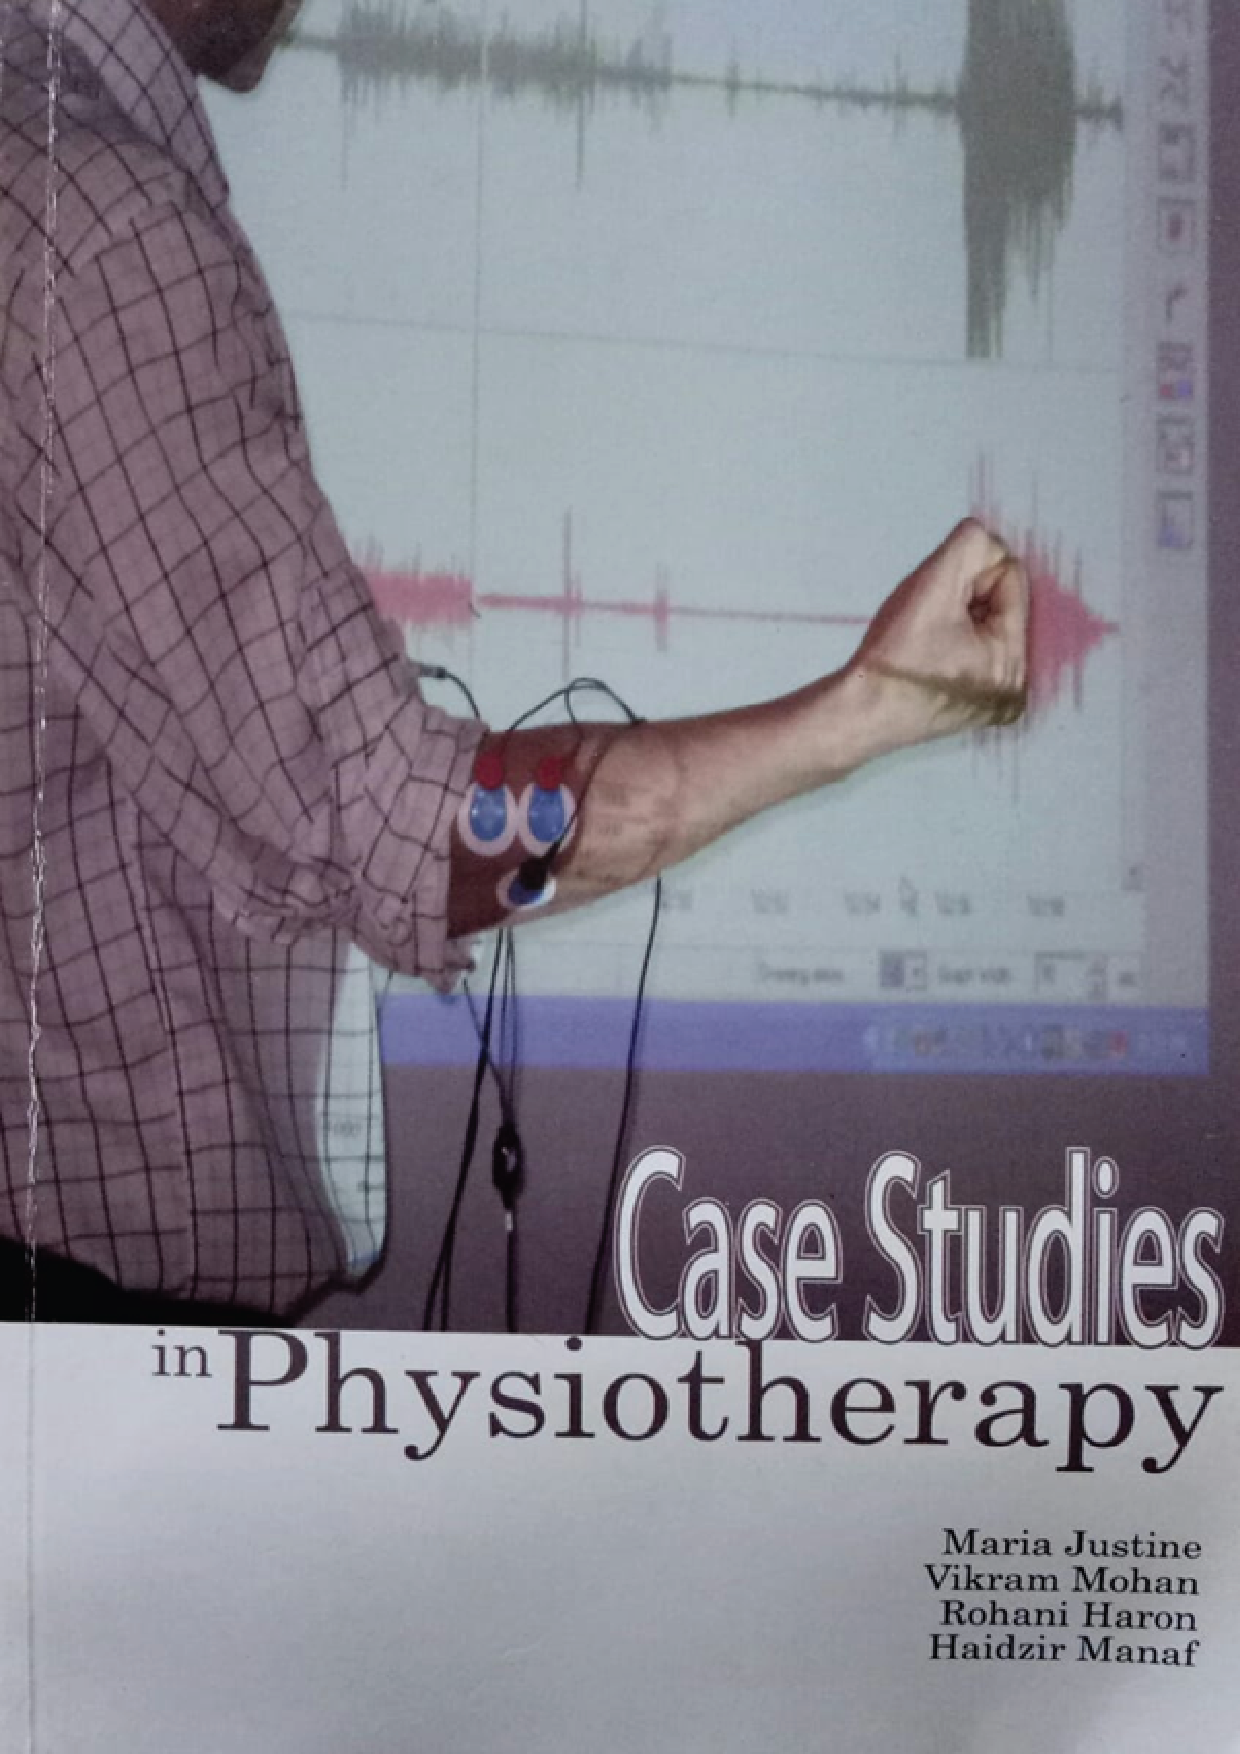 CASE STUDIES IN PHYSIOTHERAPY